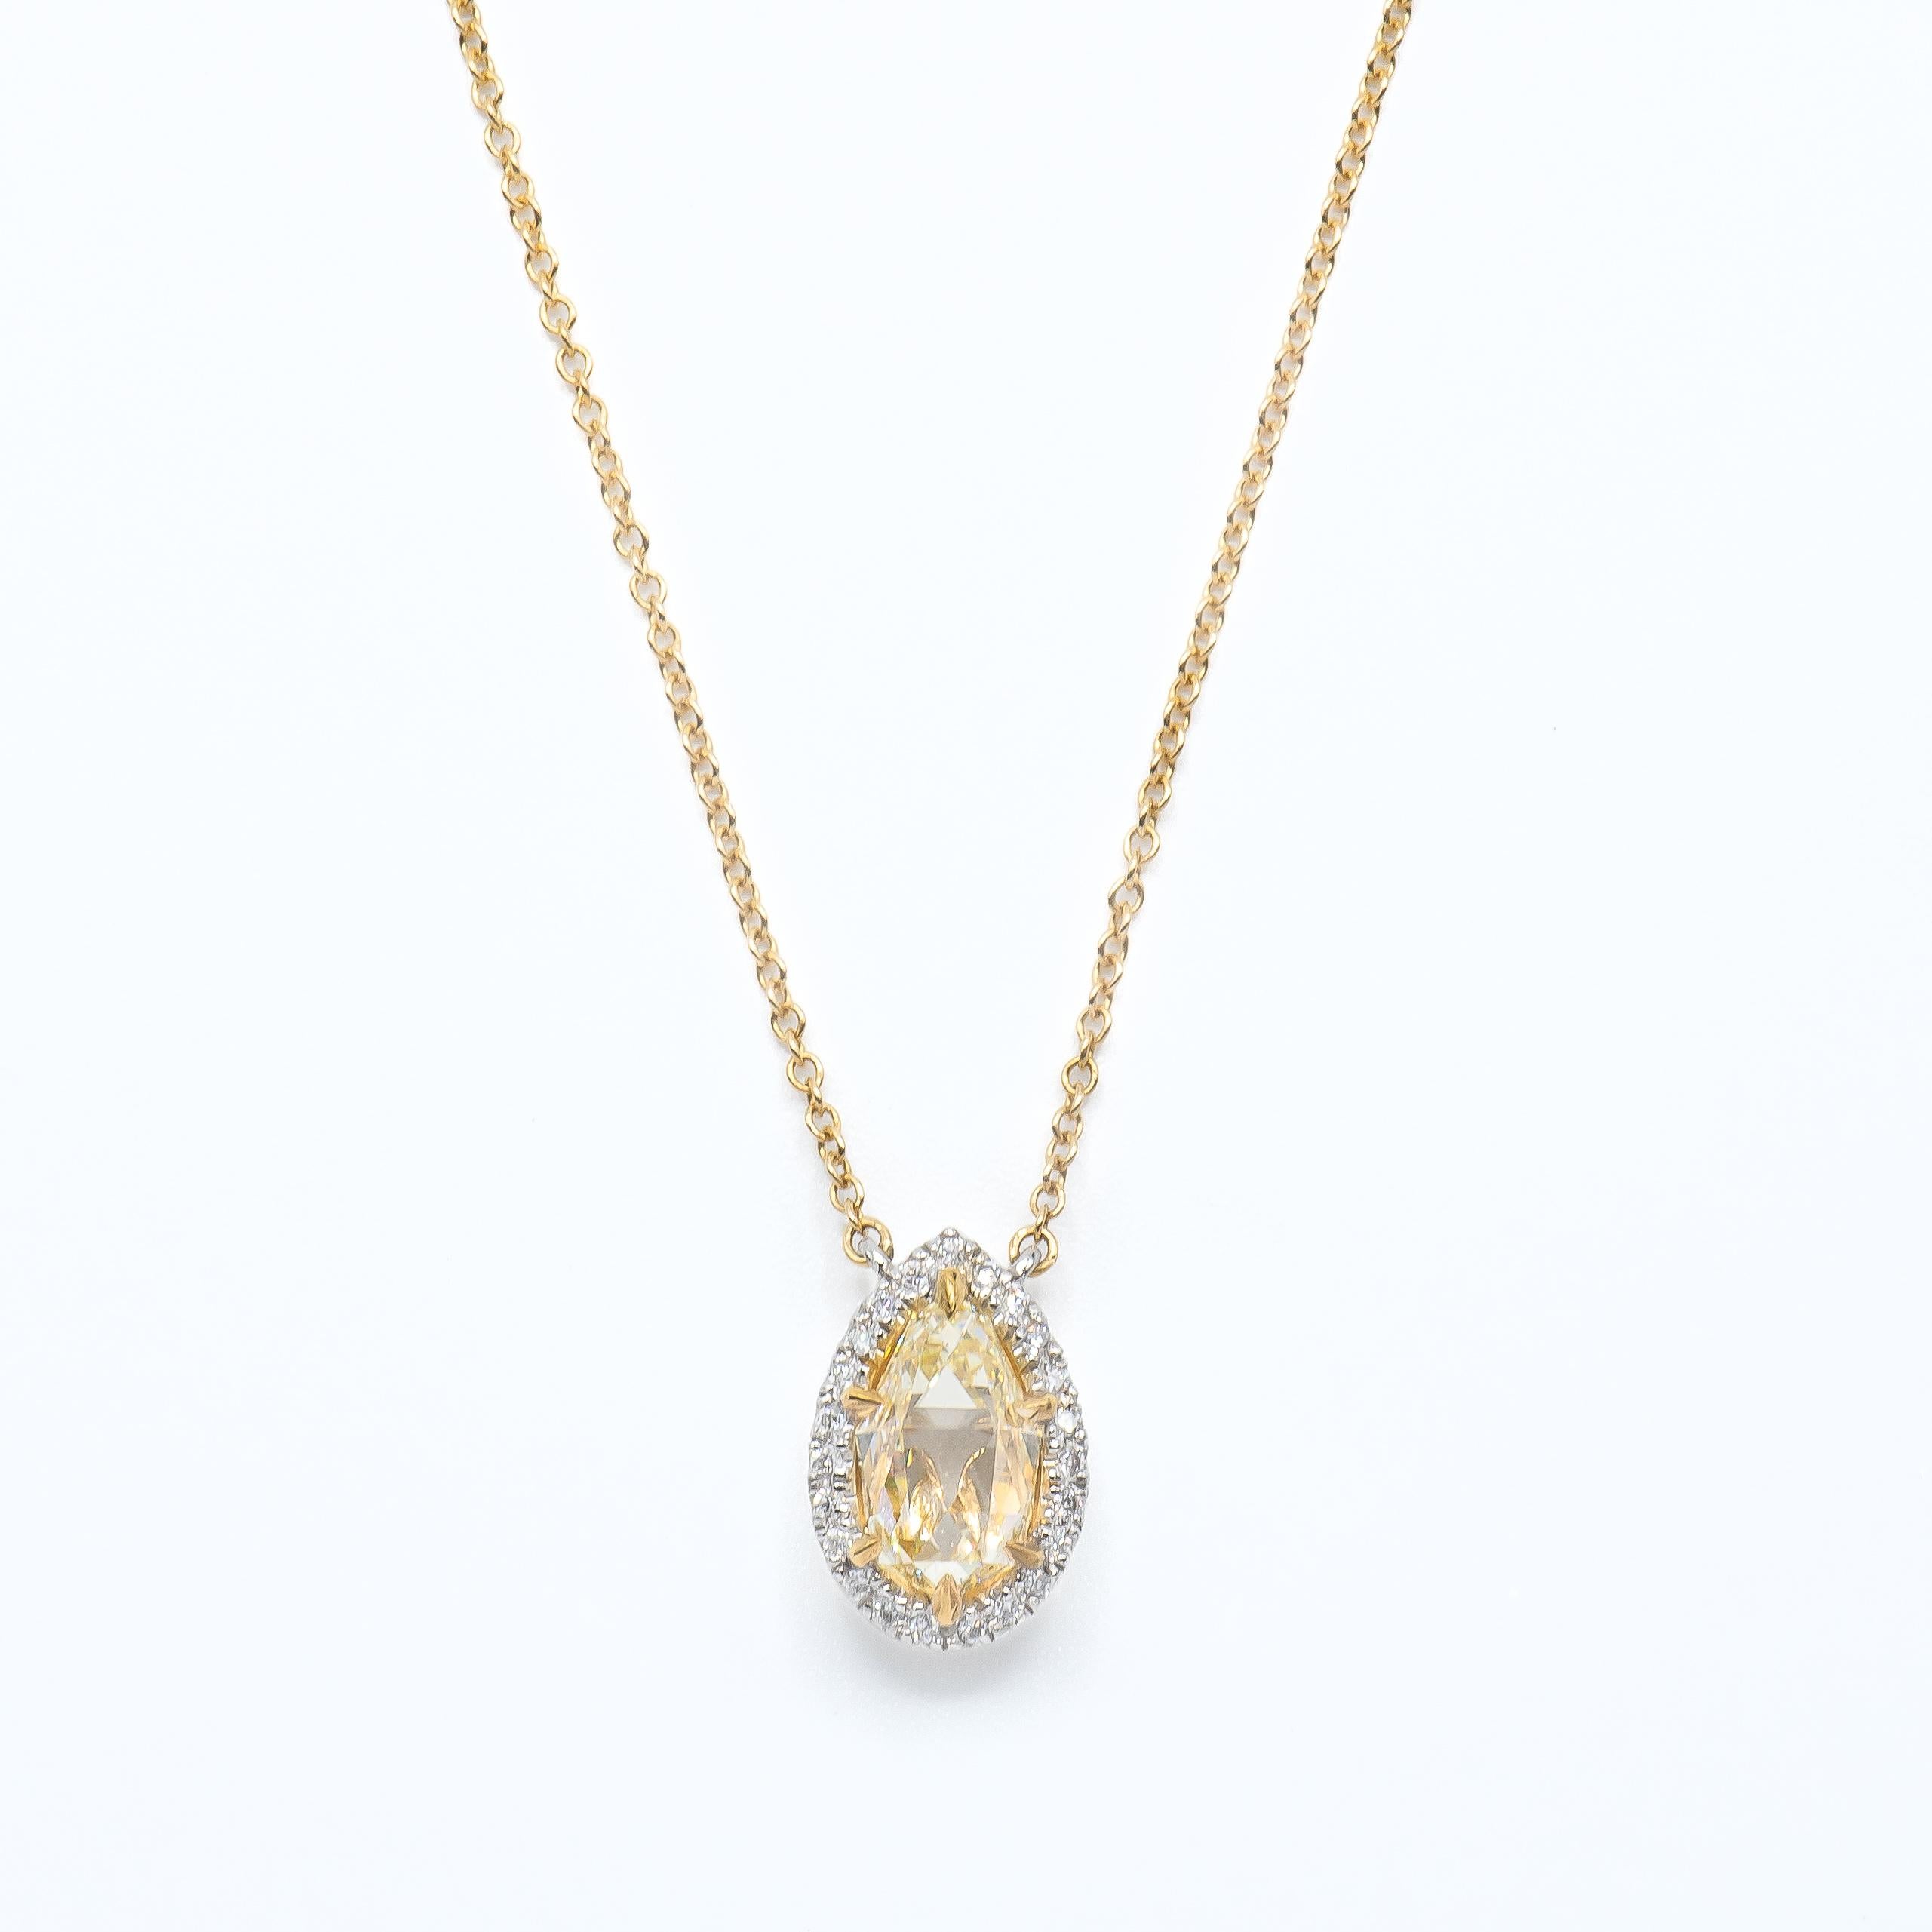 This beautiful pendant features a unique Briolette Cut Diamond weighing 1.87 Carats, certified by GIA as Fancy Light Yellow in color and SI1 in clarity. GIA grades its Polish and Symmetry as Excellent and containing No Fluorescence. 
Surrounded by